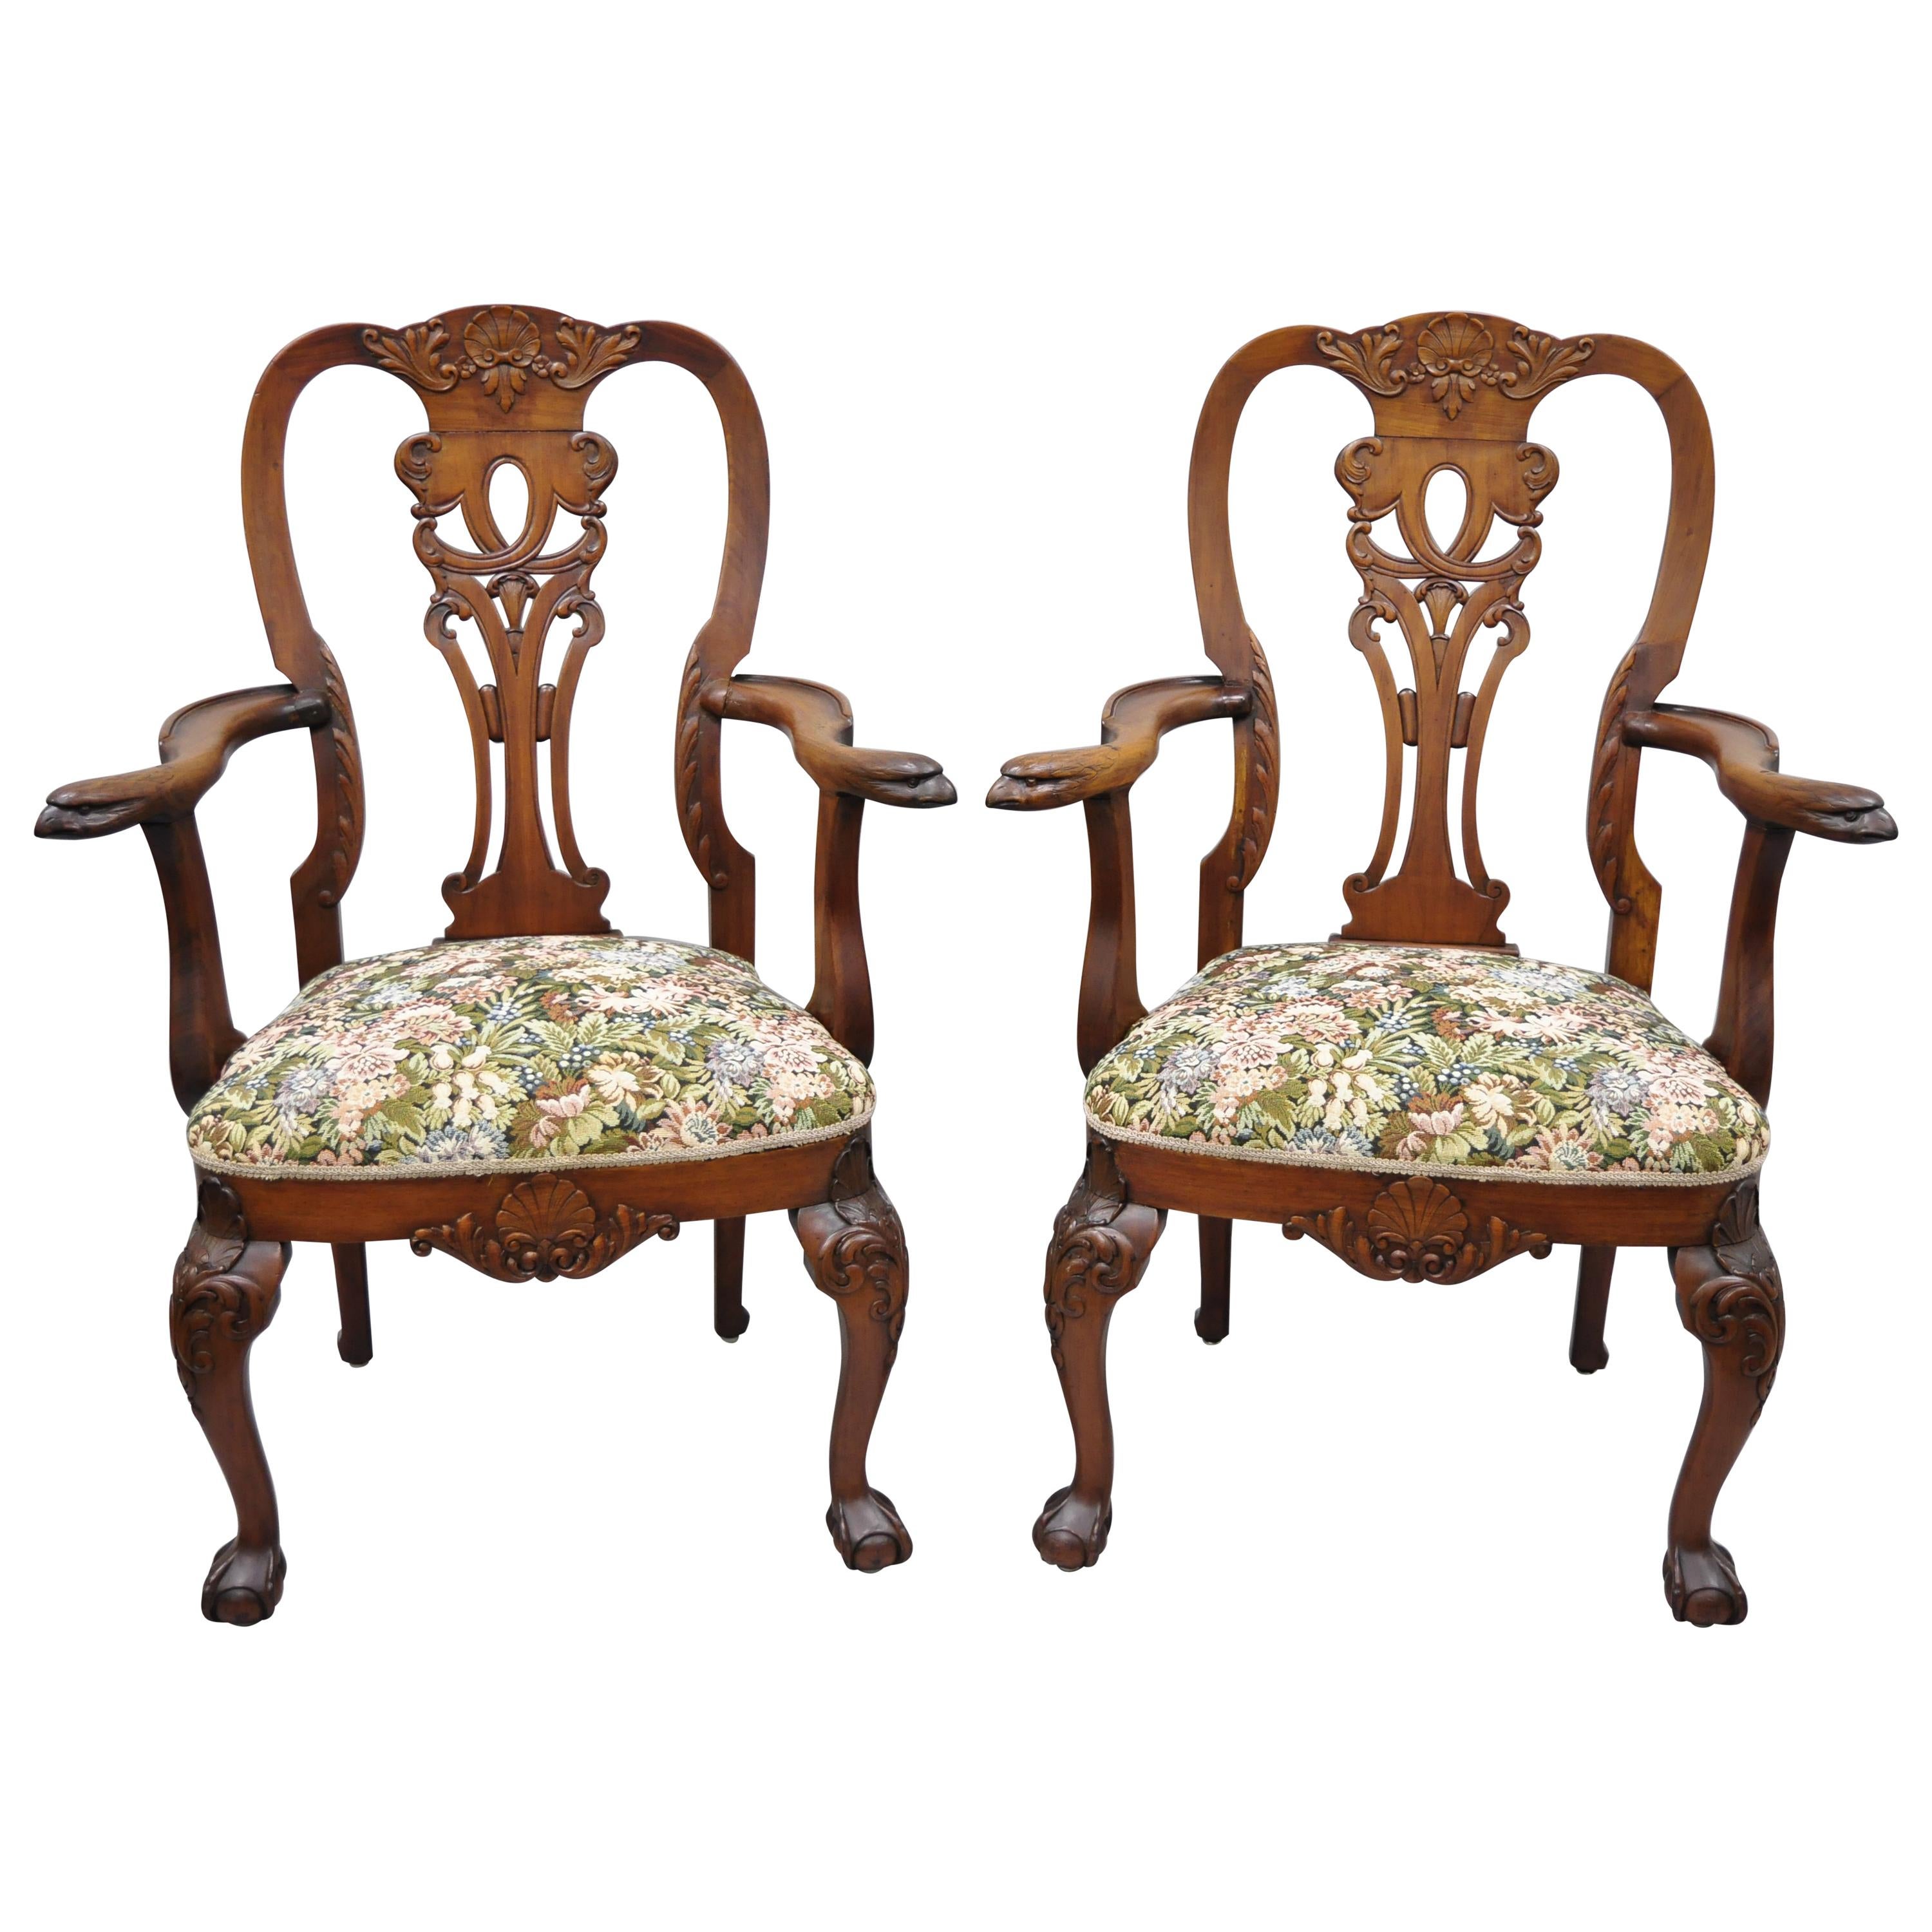 Early 20th Century Mahogany Chippendale Style Armchairs Carved with Eagle Heads